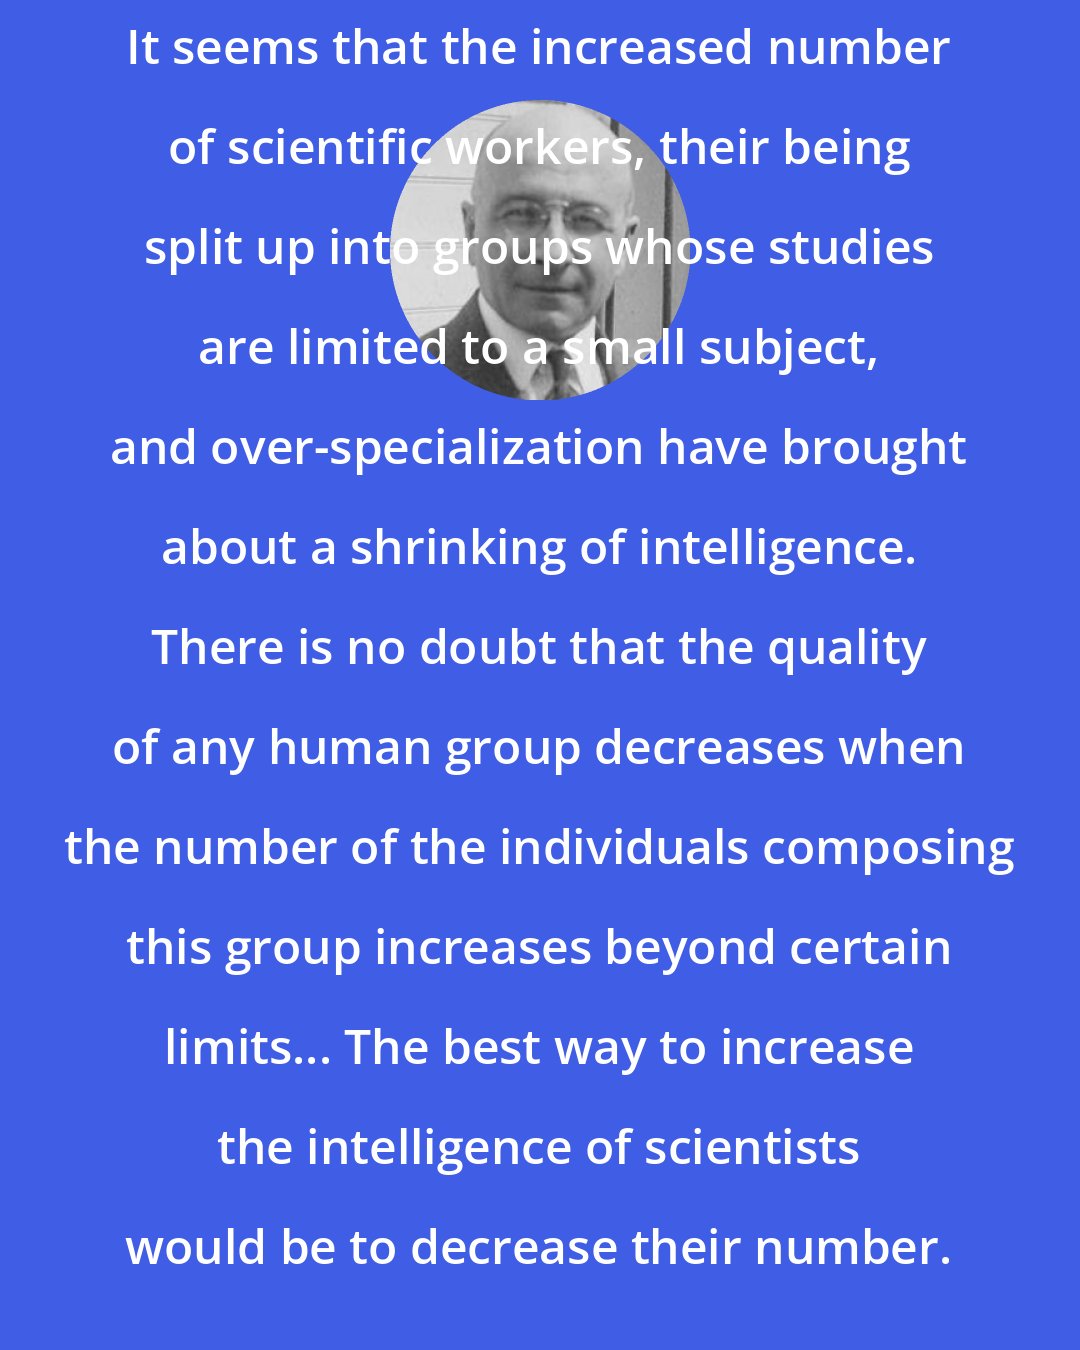 Alexis Carrel: It seems that the increased number of scientific workers, their being split up into groups whose studies are limited to a small subject, and over-specialization have brought about a shrinking of intelligence. There is no doubt that the quality of any human group decreases when the number of the individuals composing this group increases beyond certain limits... The best way to increase the intelligence of scientists would be to decrease their number.